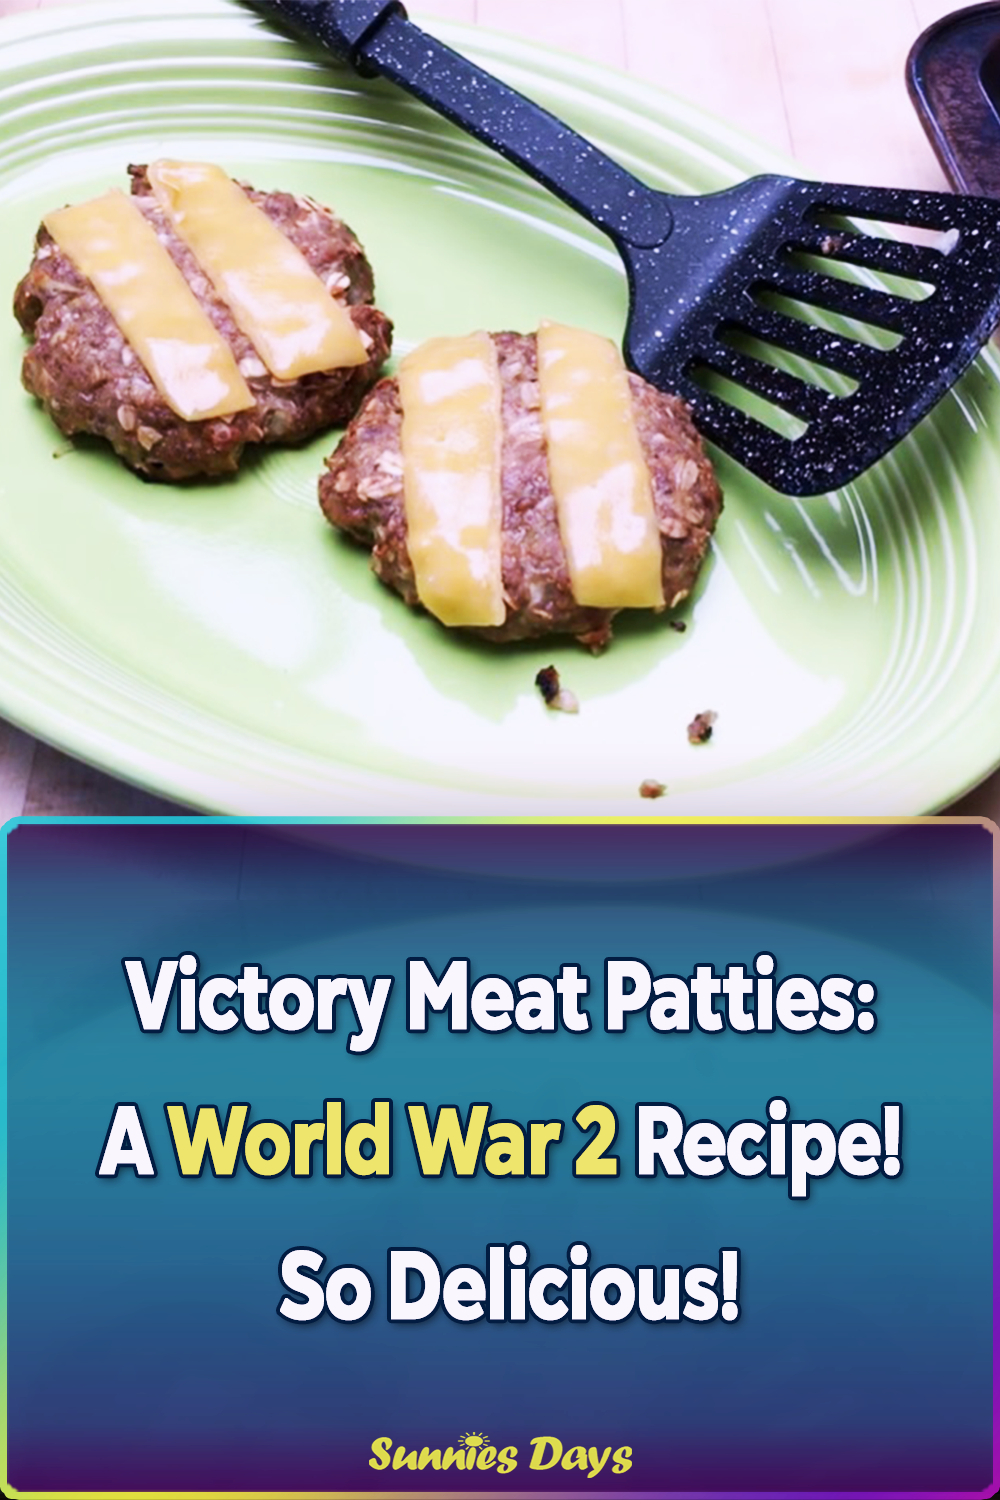 ration food, WW2 recipe, world war foods, fast foods, Meat patties, delicious,